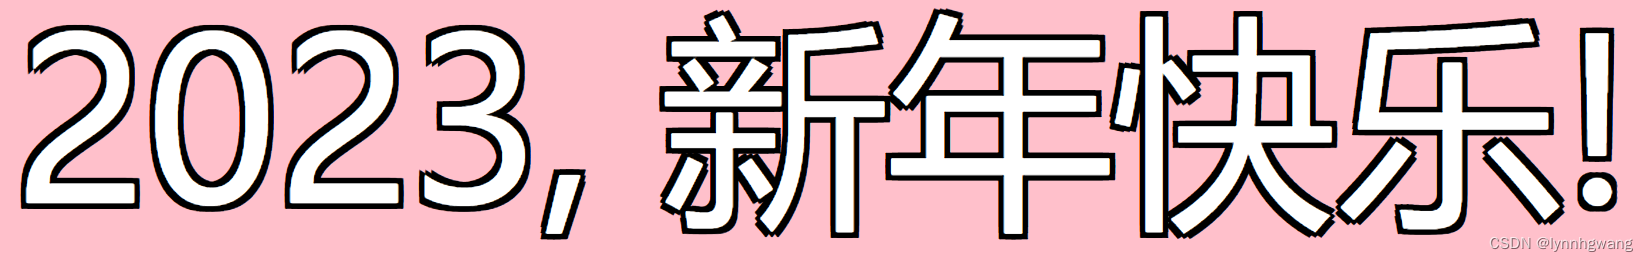 【CSS】文字<span style='color:red;'>描</span><span style='color:red;'>边</span><span style='color:red;'>的</span>三种实现方式